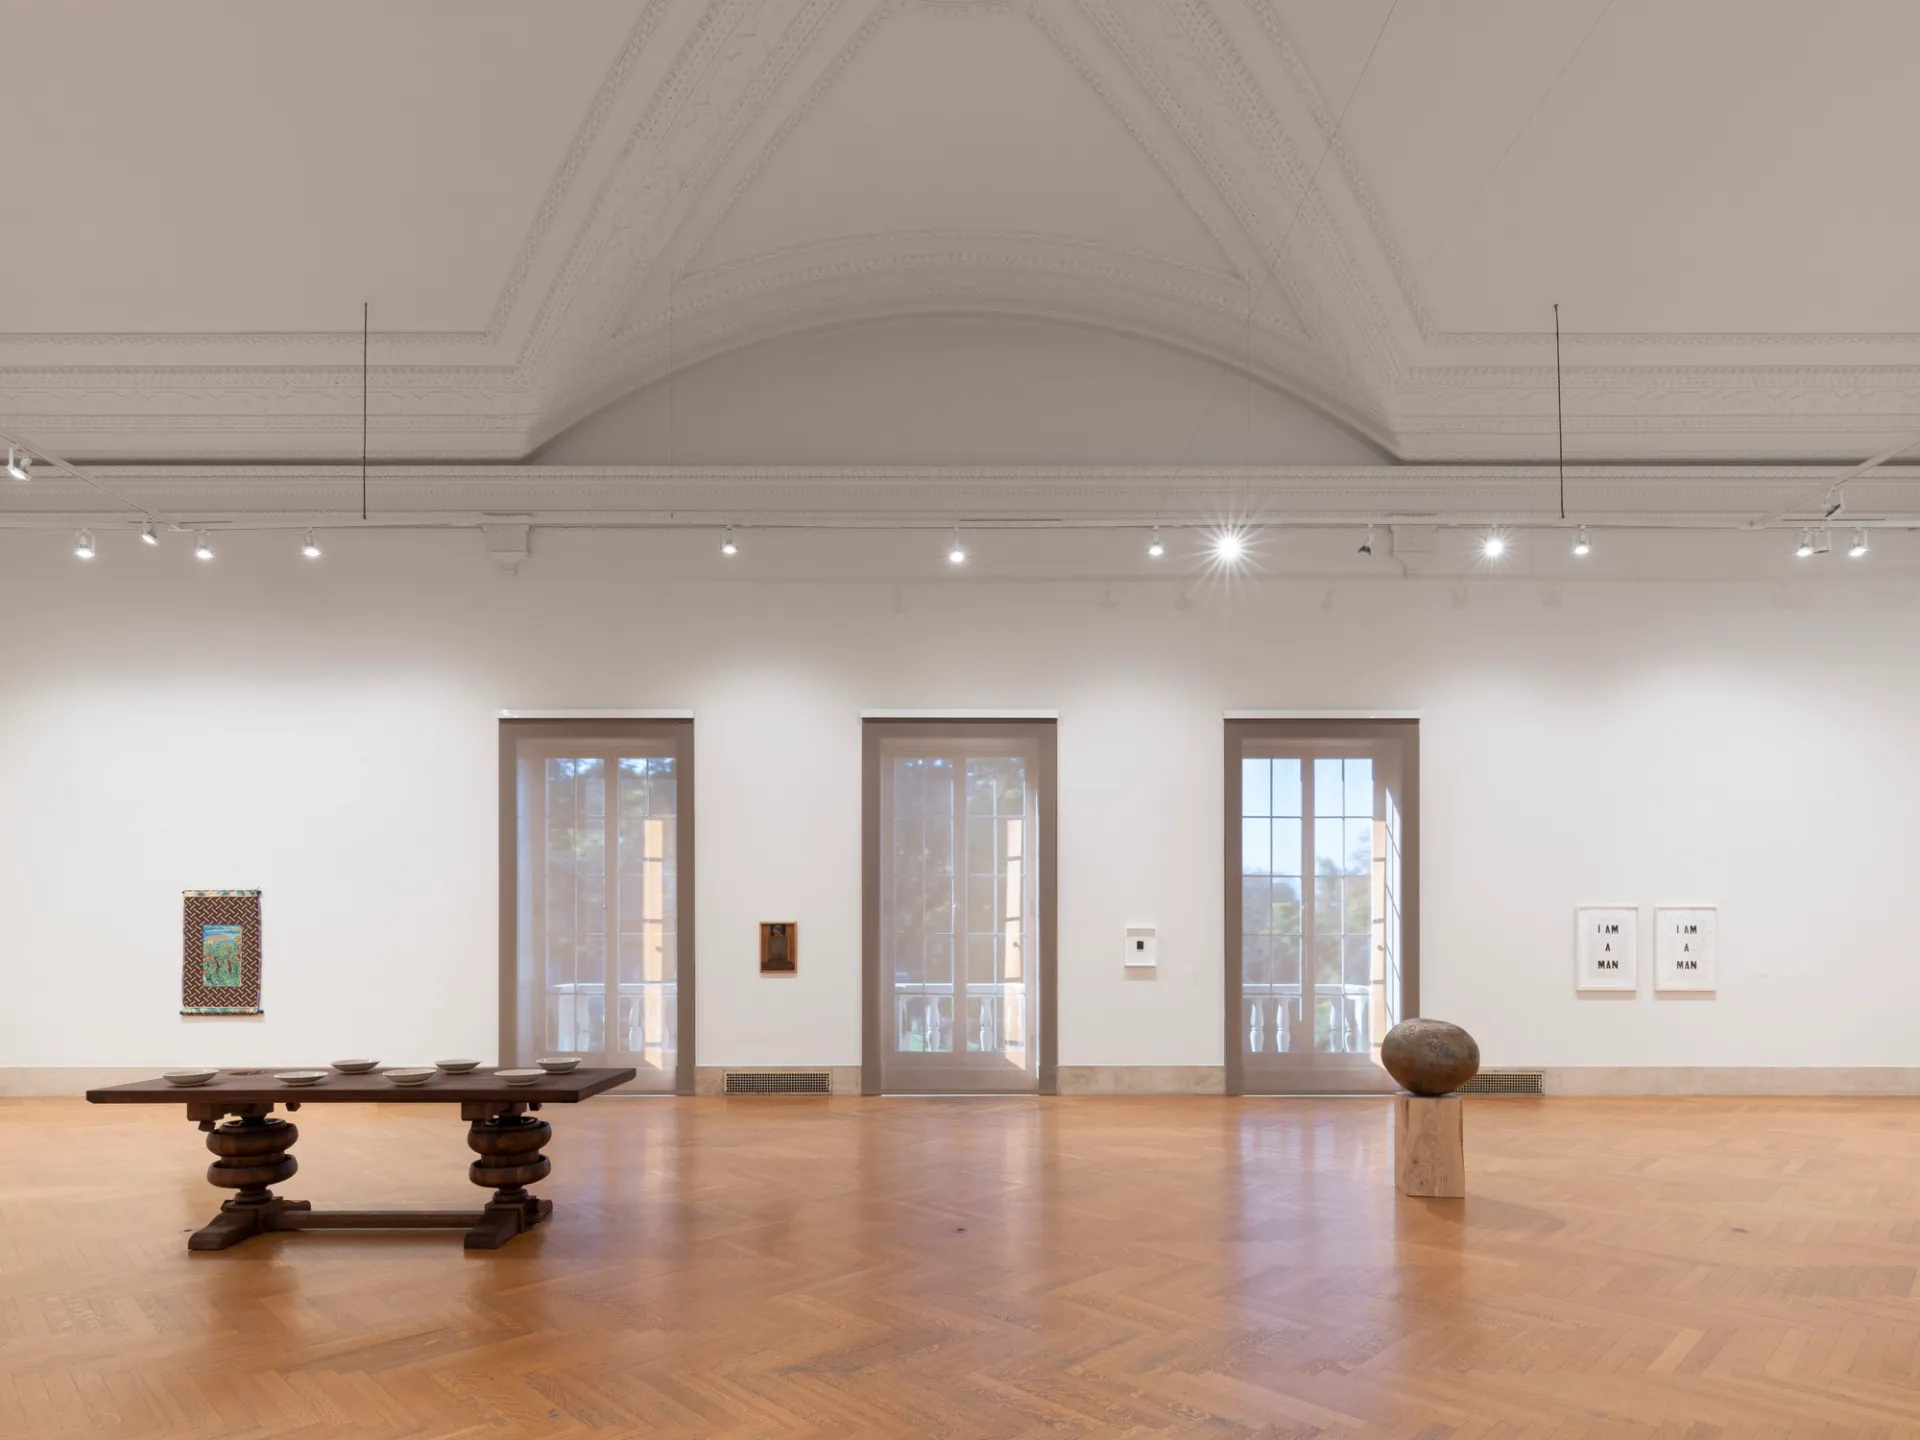 A large enclosed gallery space with three parallel windows, a sculpture and framed artworks to the right, and a carved wooden table holding objects in front of a single framed artwork positioned to the left